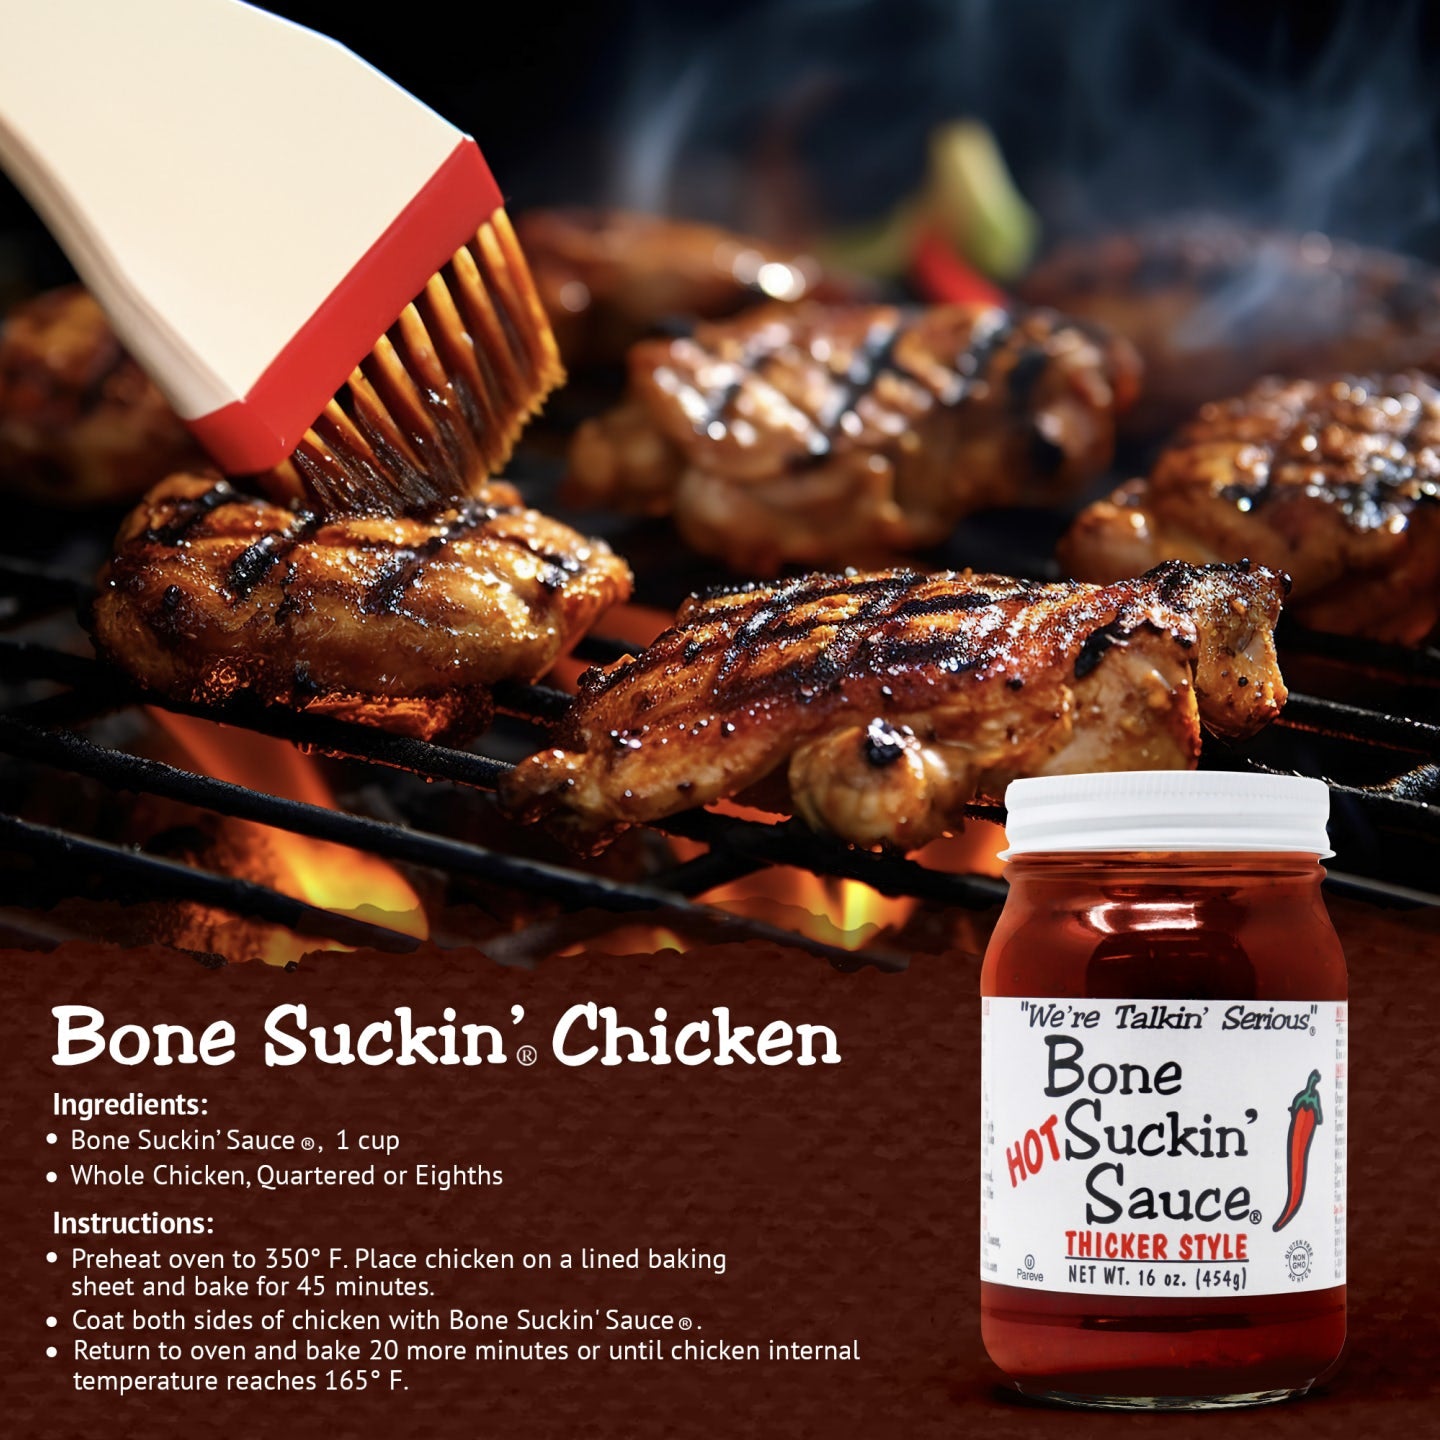 Bone Suckin’® Chicken Recipe | Bone Suckin' Sauce®, 1 cup, Whole Chicken, quartered or eighths. Instructions: Preheat oven to 350 degrees. Place chicken on a lined baking sheet and bake for 45 minutes. Coat both sides of chicken with Bone Suckin Sauce. Return to oven and bake 20 more minutes or until chicken internal temp reaches 165°F.